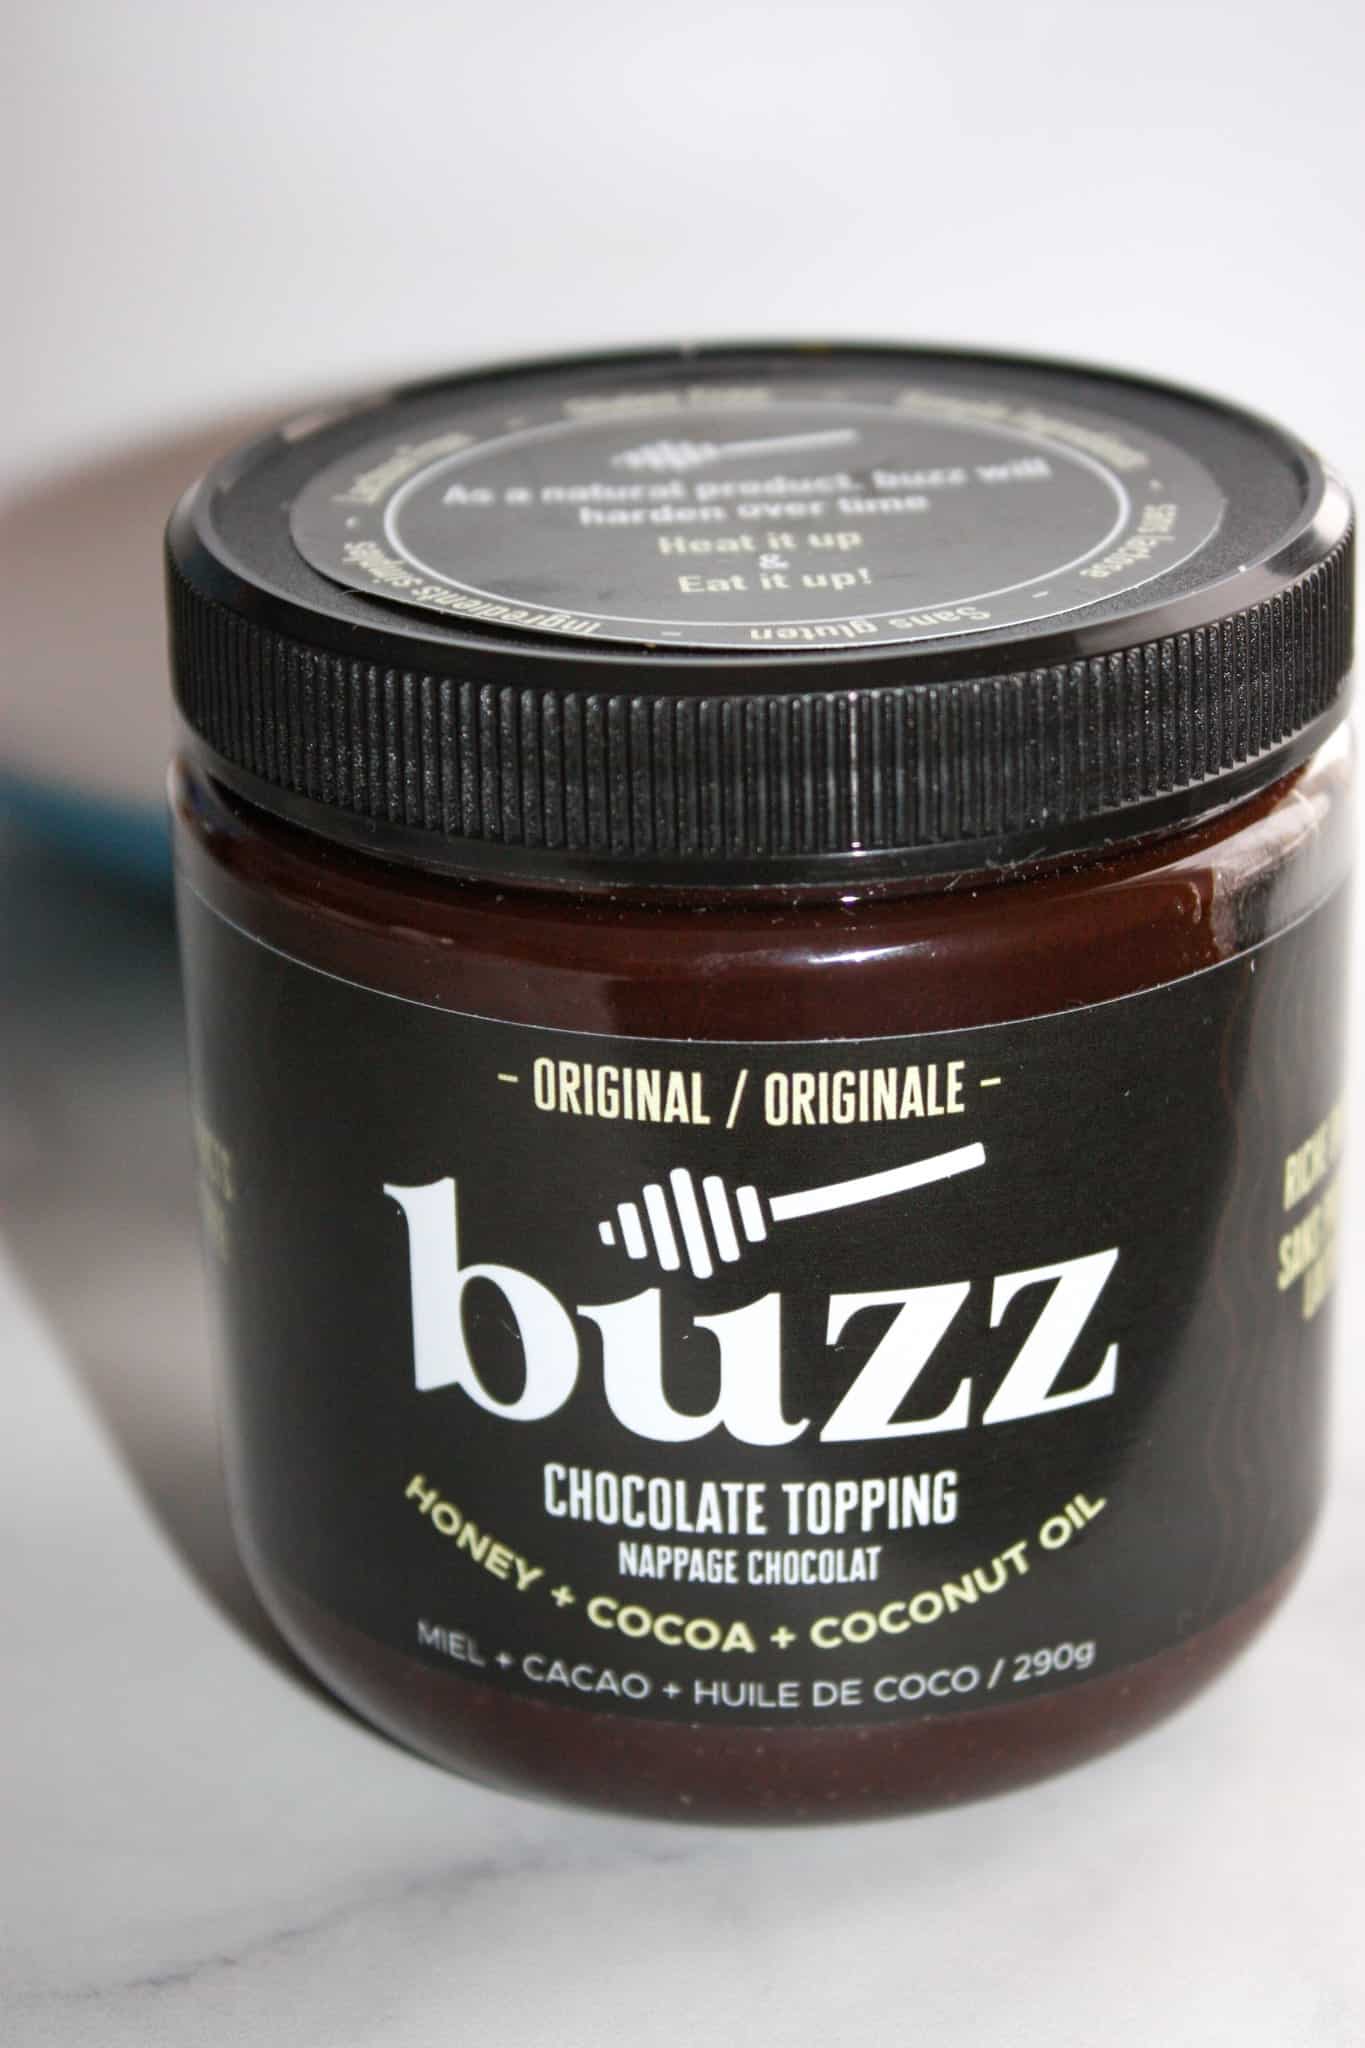 The jar of Buzz.